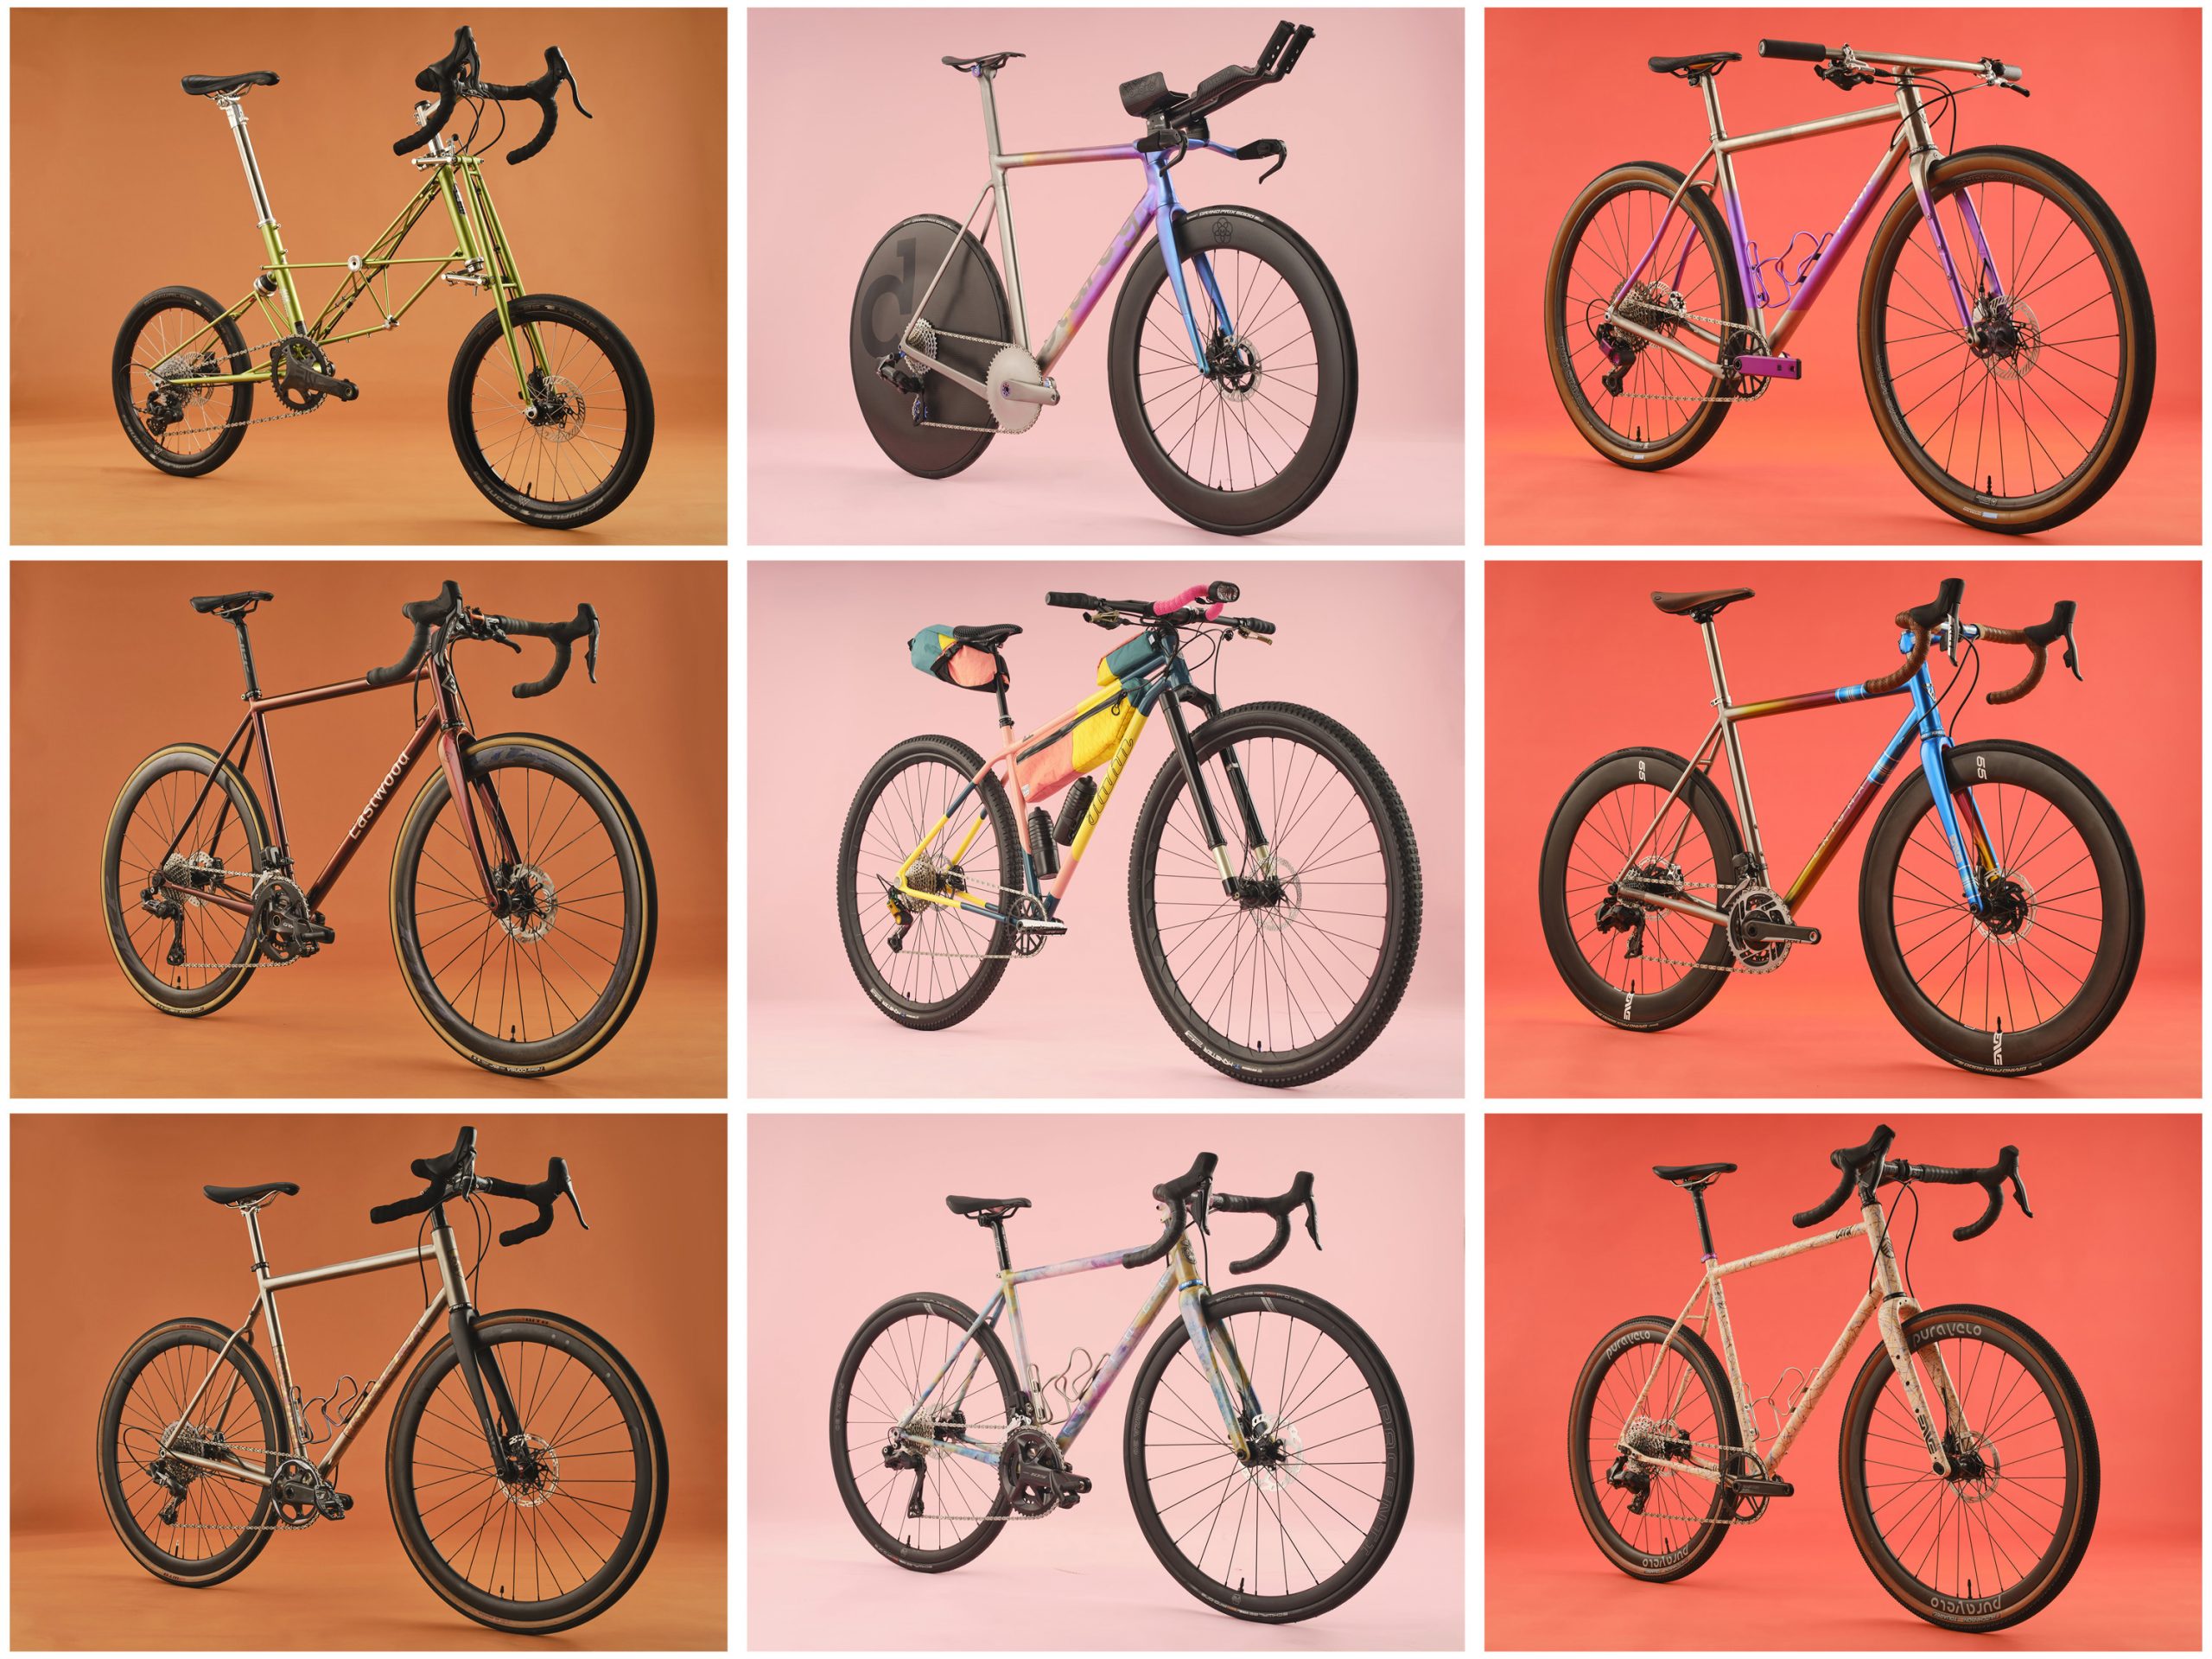 Collage of studio photographs of handmade bikes on display at the Bespoked bike show in 2022